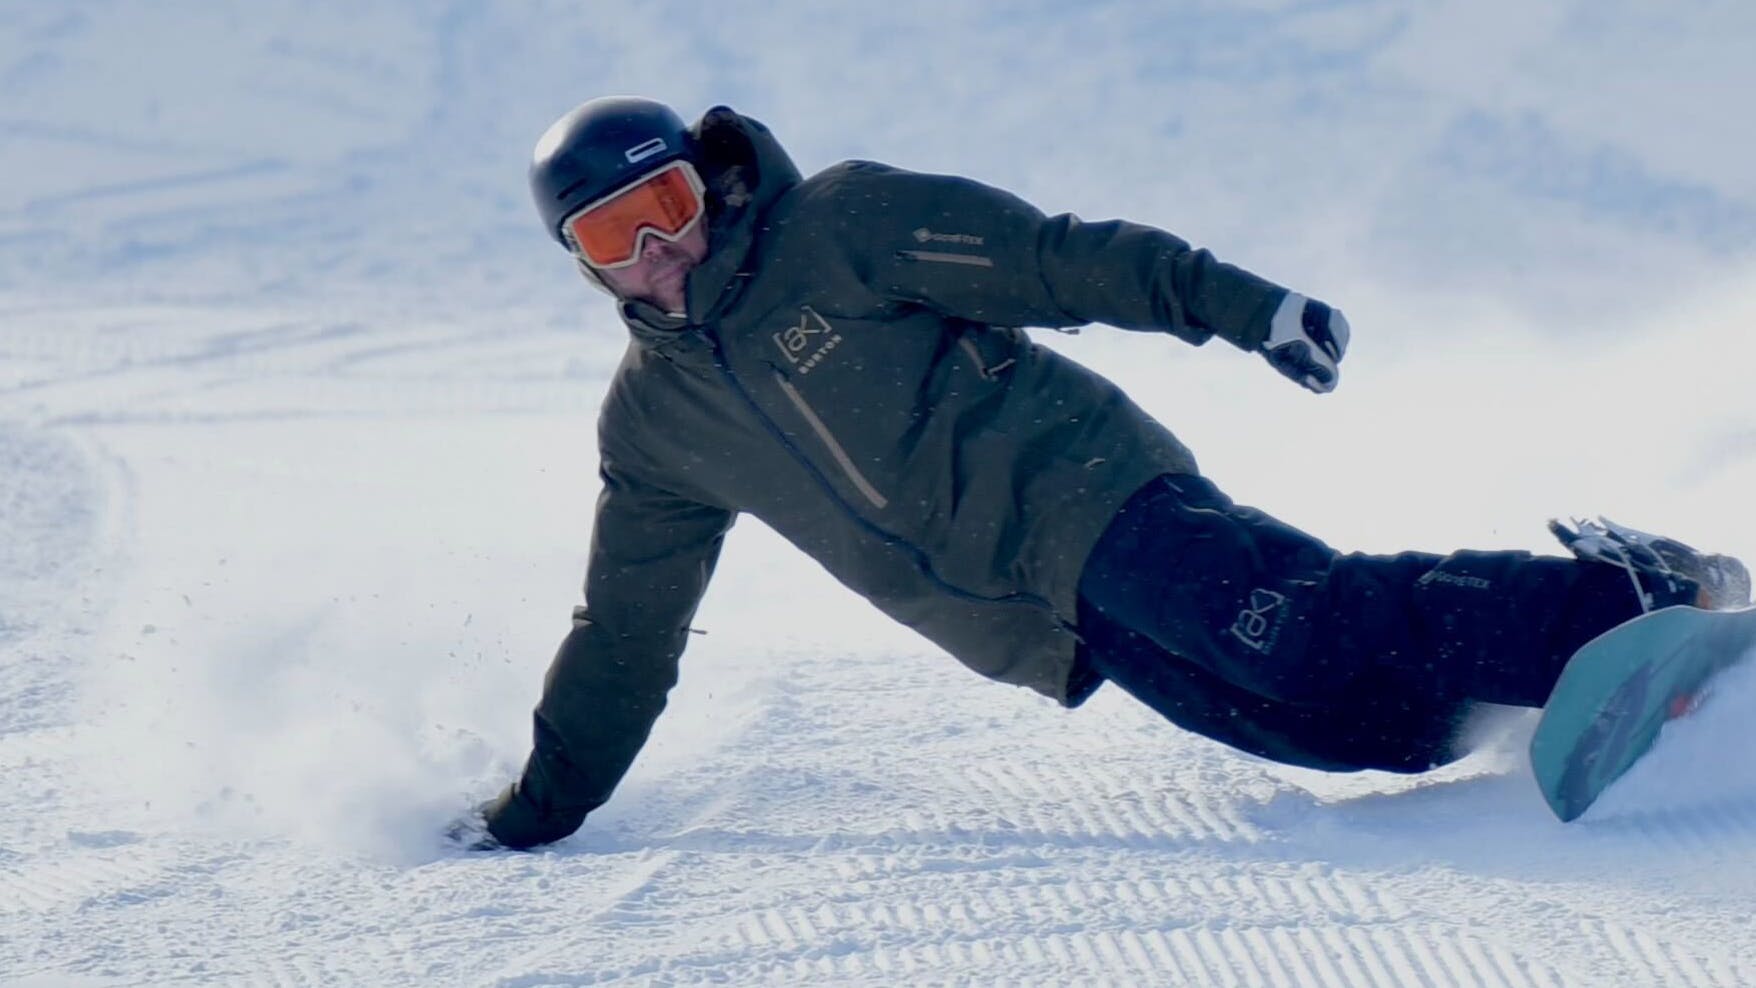 Eric Schultheiss rides his K2 Party Platter snowboard and carves a turn on it.